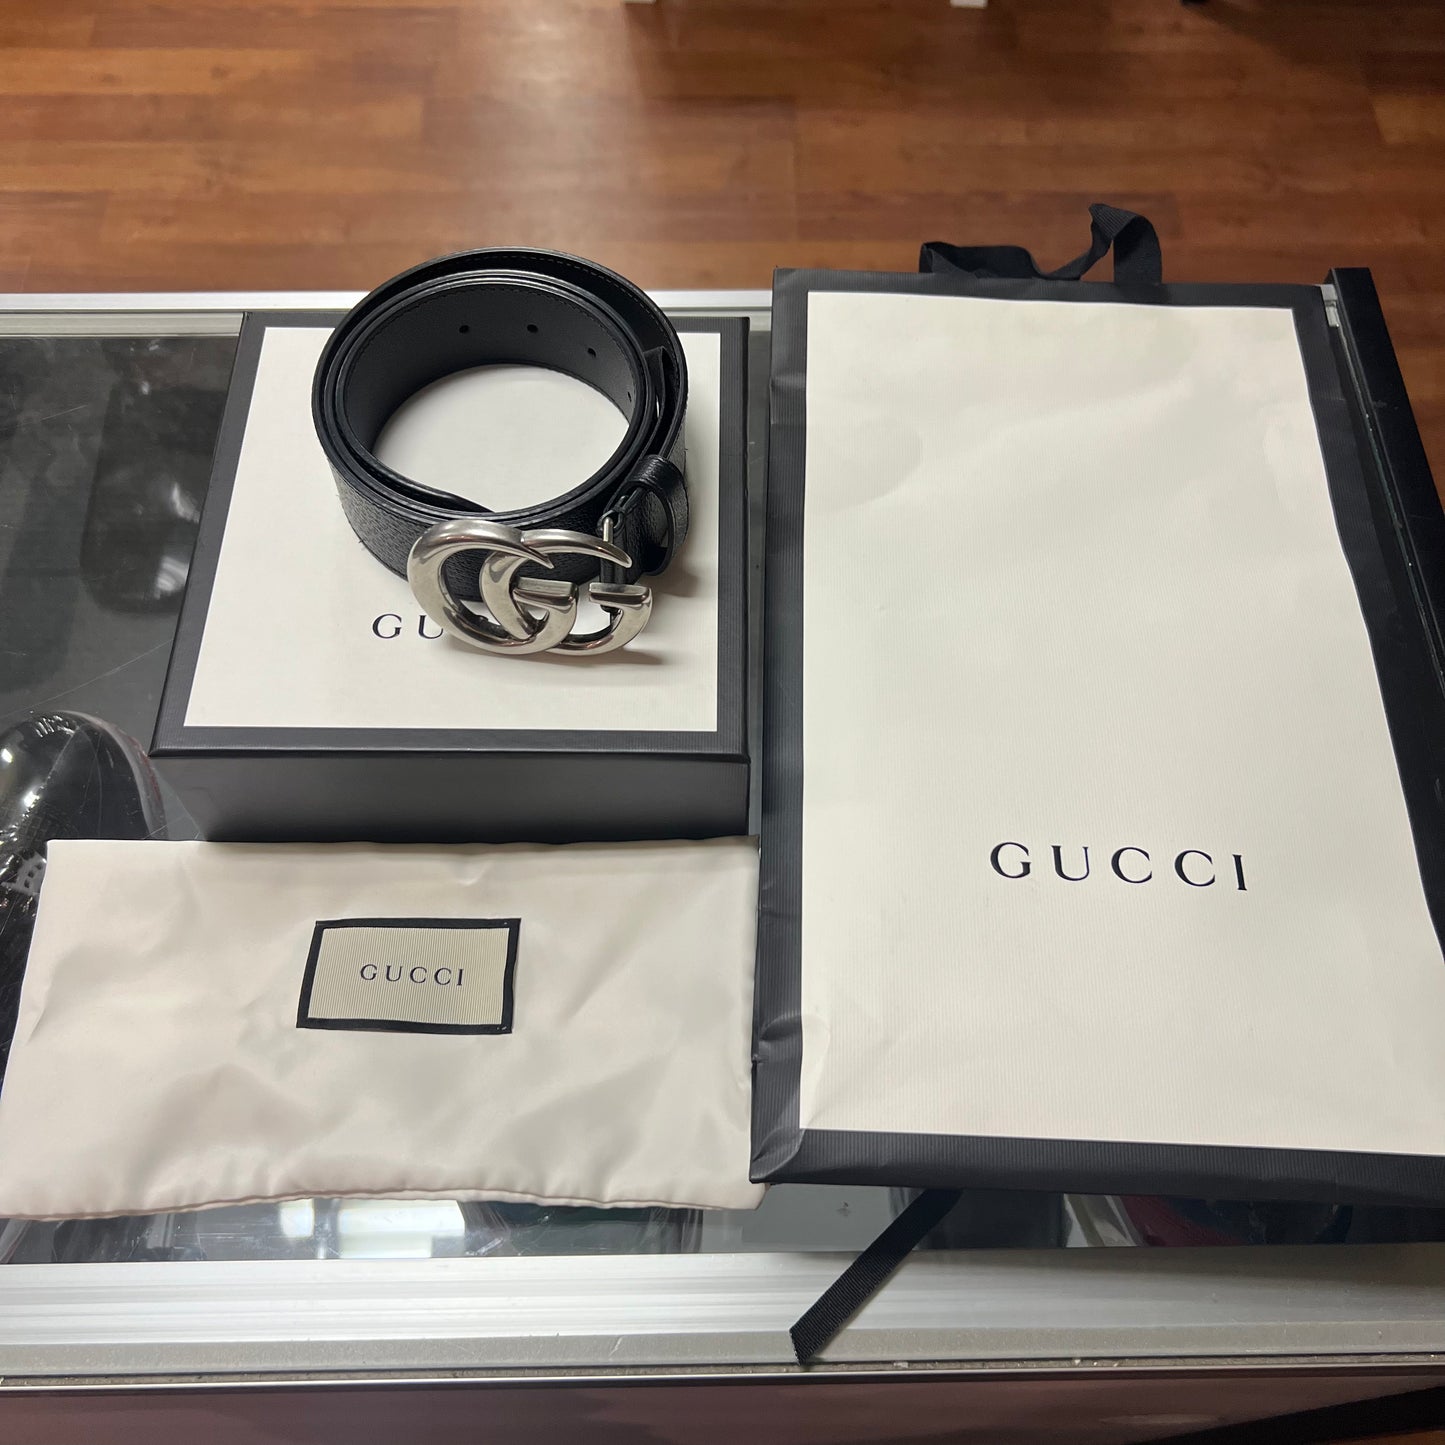 Gucci Leather Belt w/ Double G buckle - Preowned